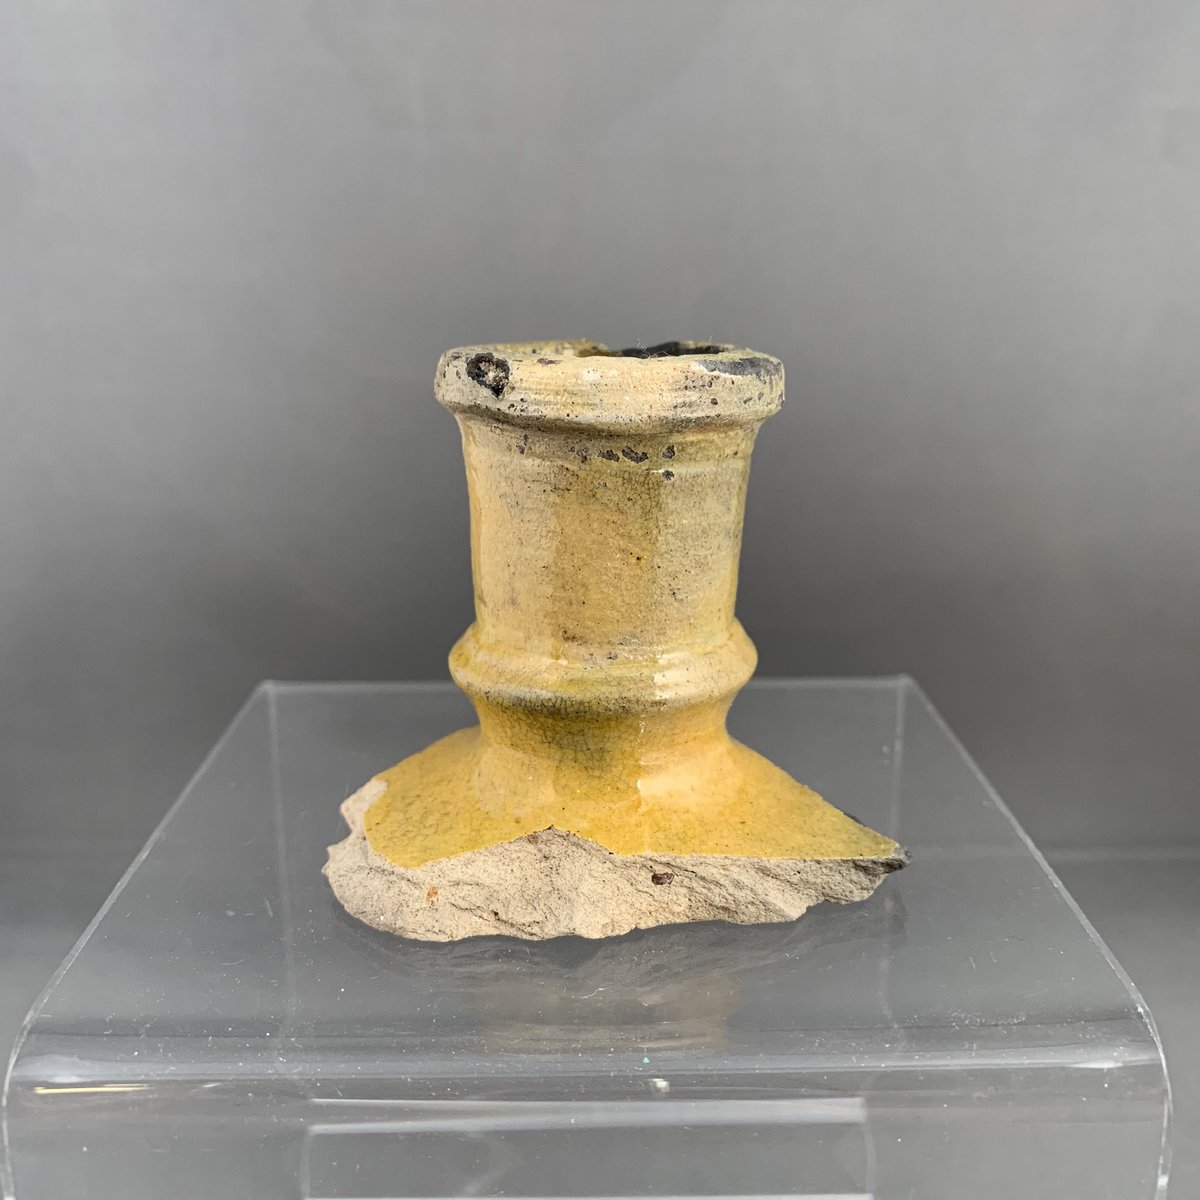 Next up:A wonderful example of an early modern candlestick holder. Unfortunately, it’s not stood the test of time and has seen better days, but we’re in love with the colour But is it an object from home or a museum item?